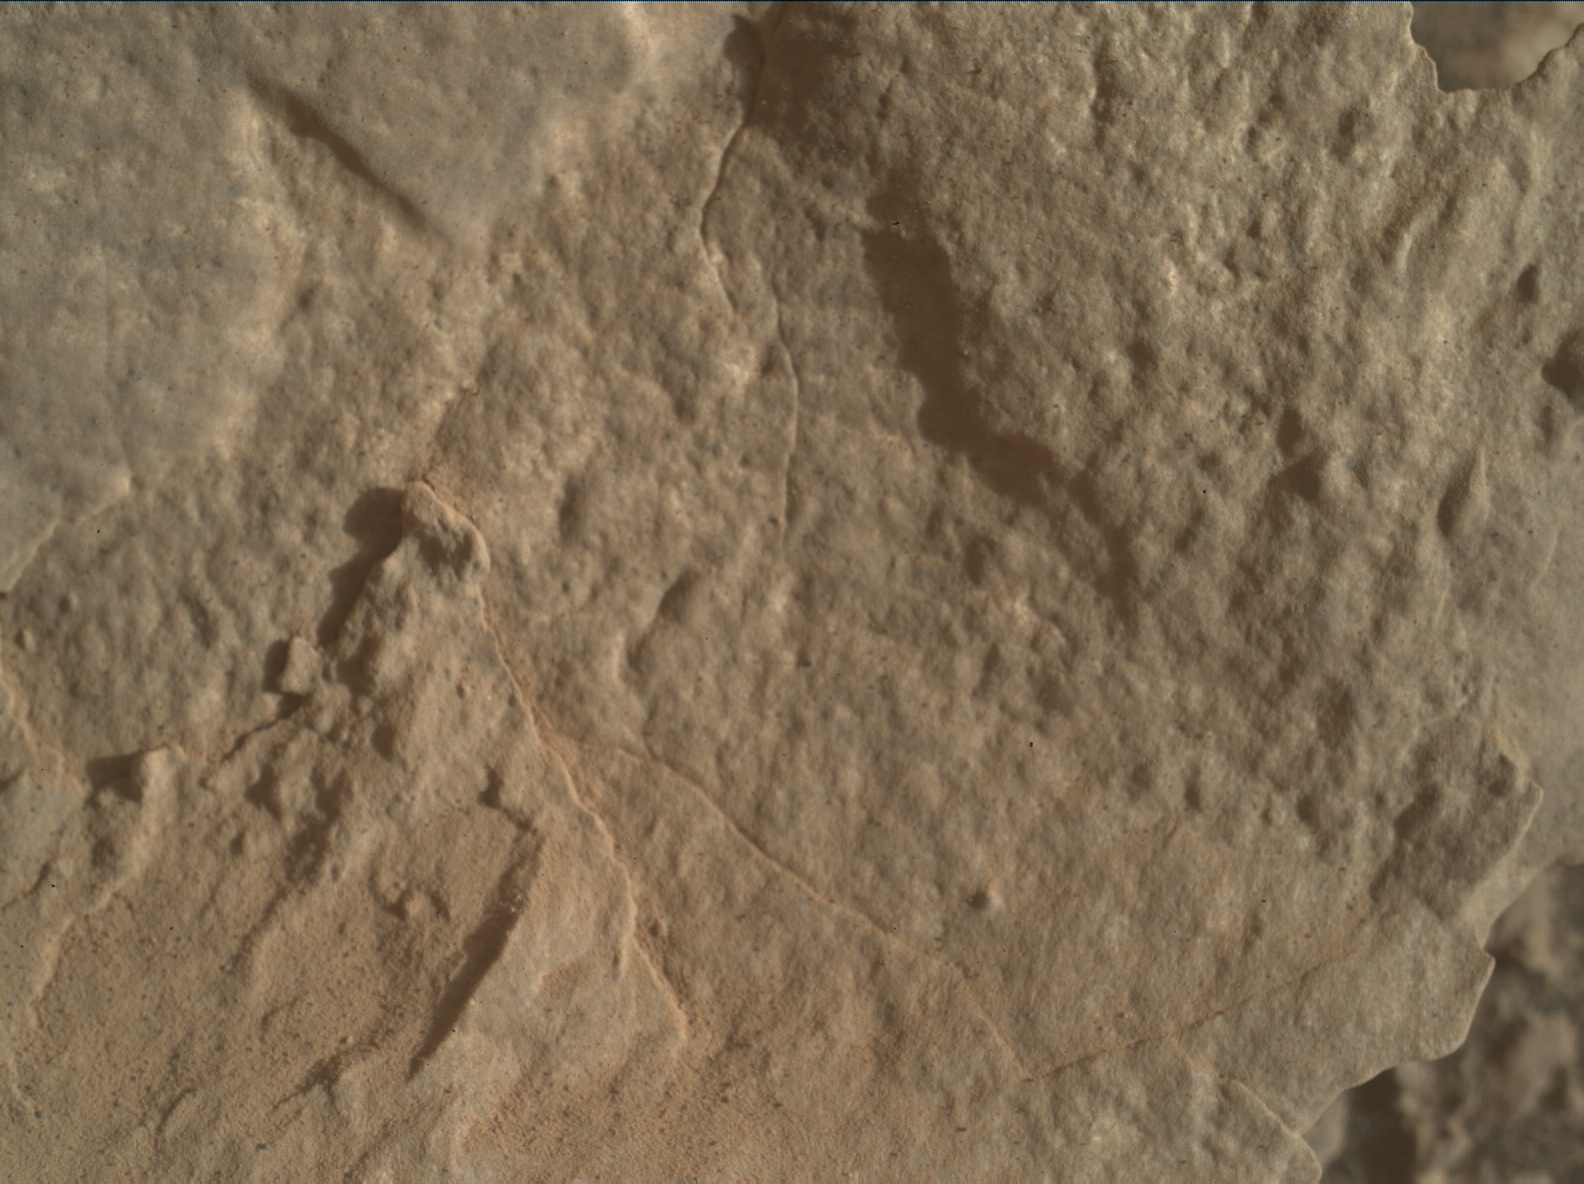 Nasa's Mars rover Curiosity acquired this image using its Mars Hand Lens Imager (MAHLI) on Sol 3115